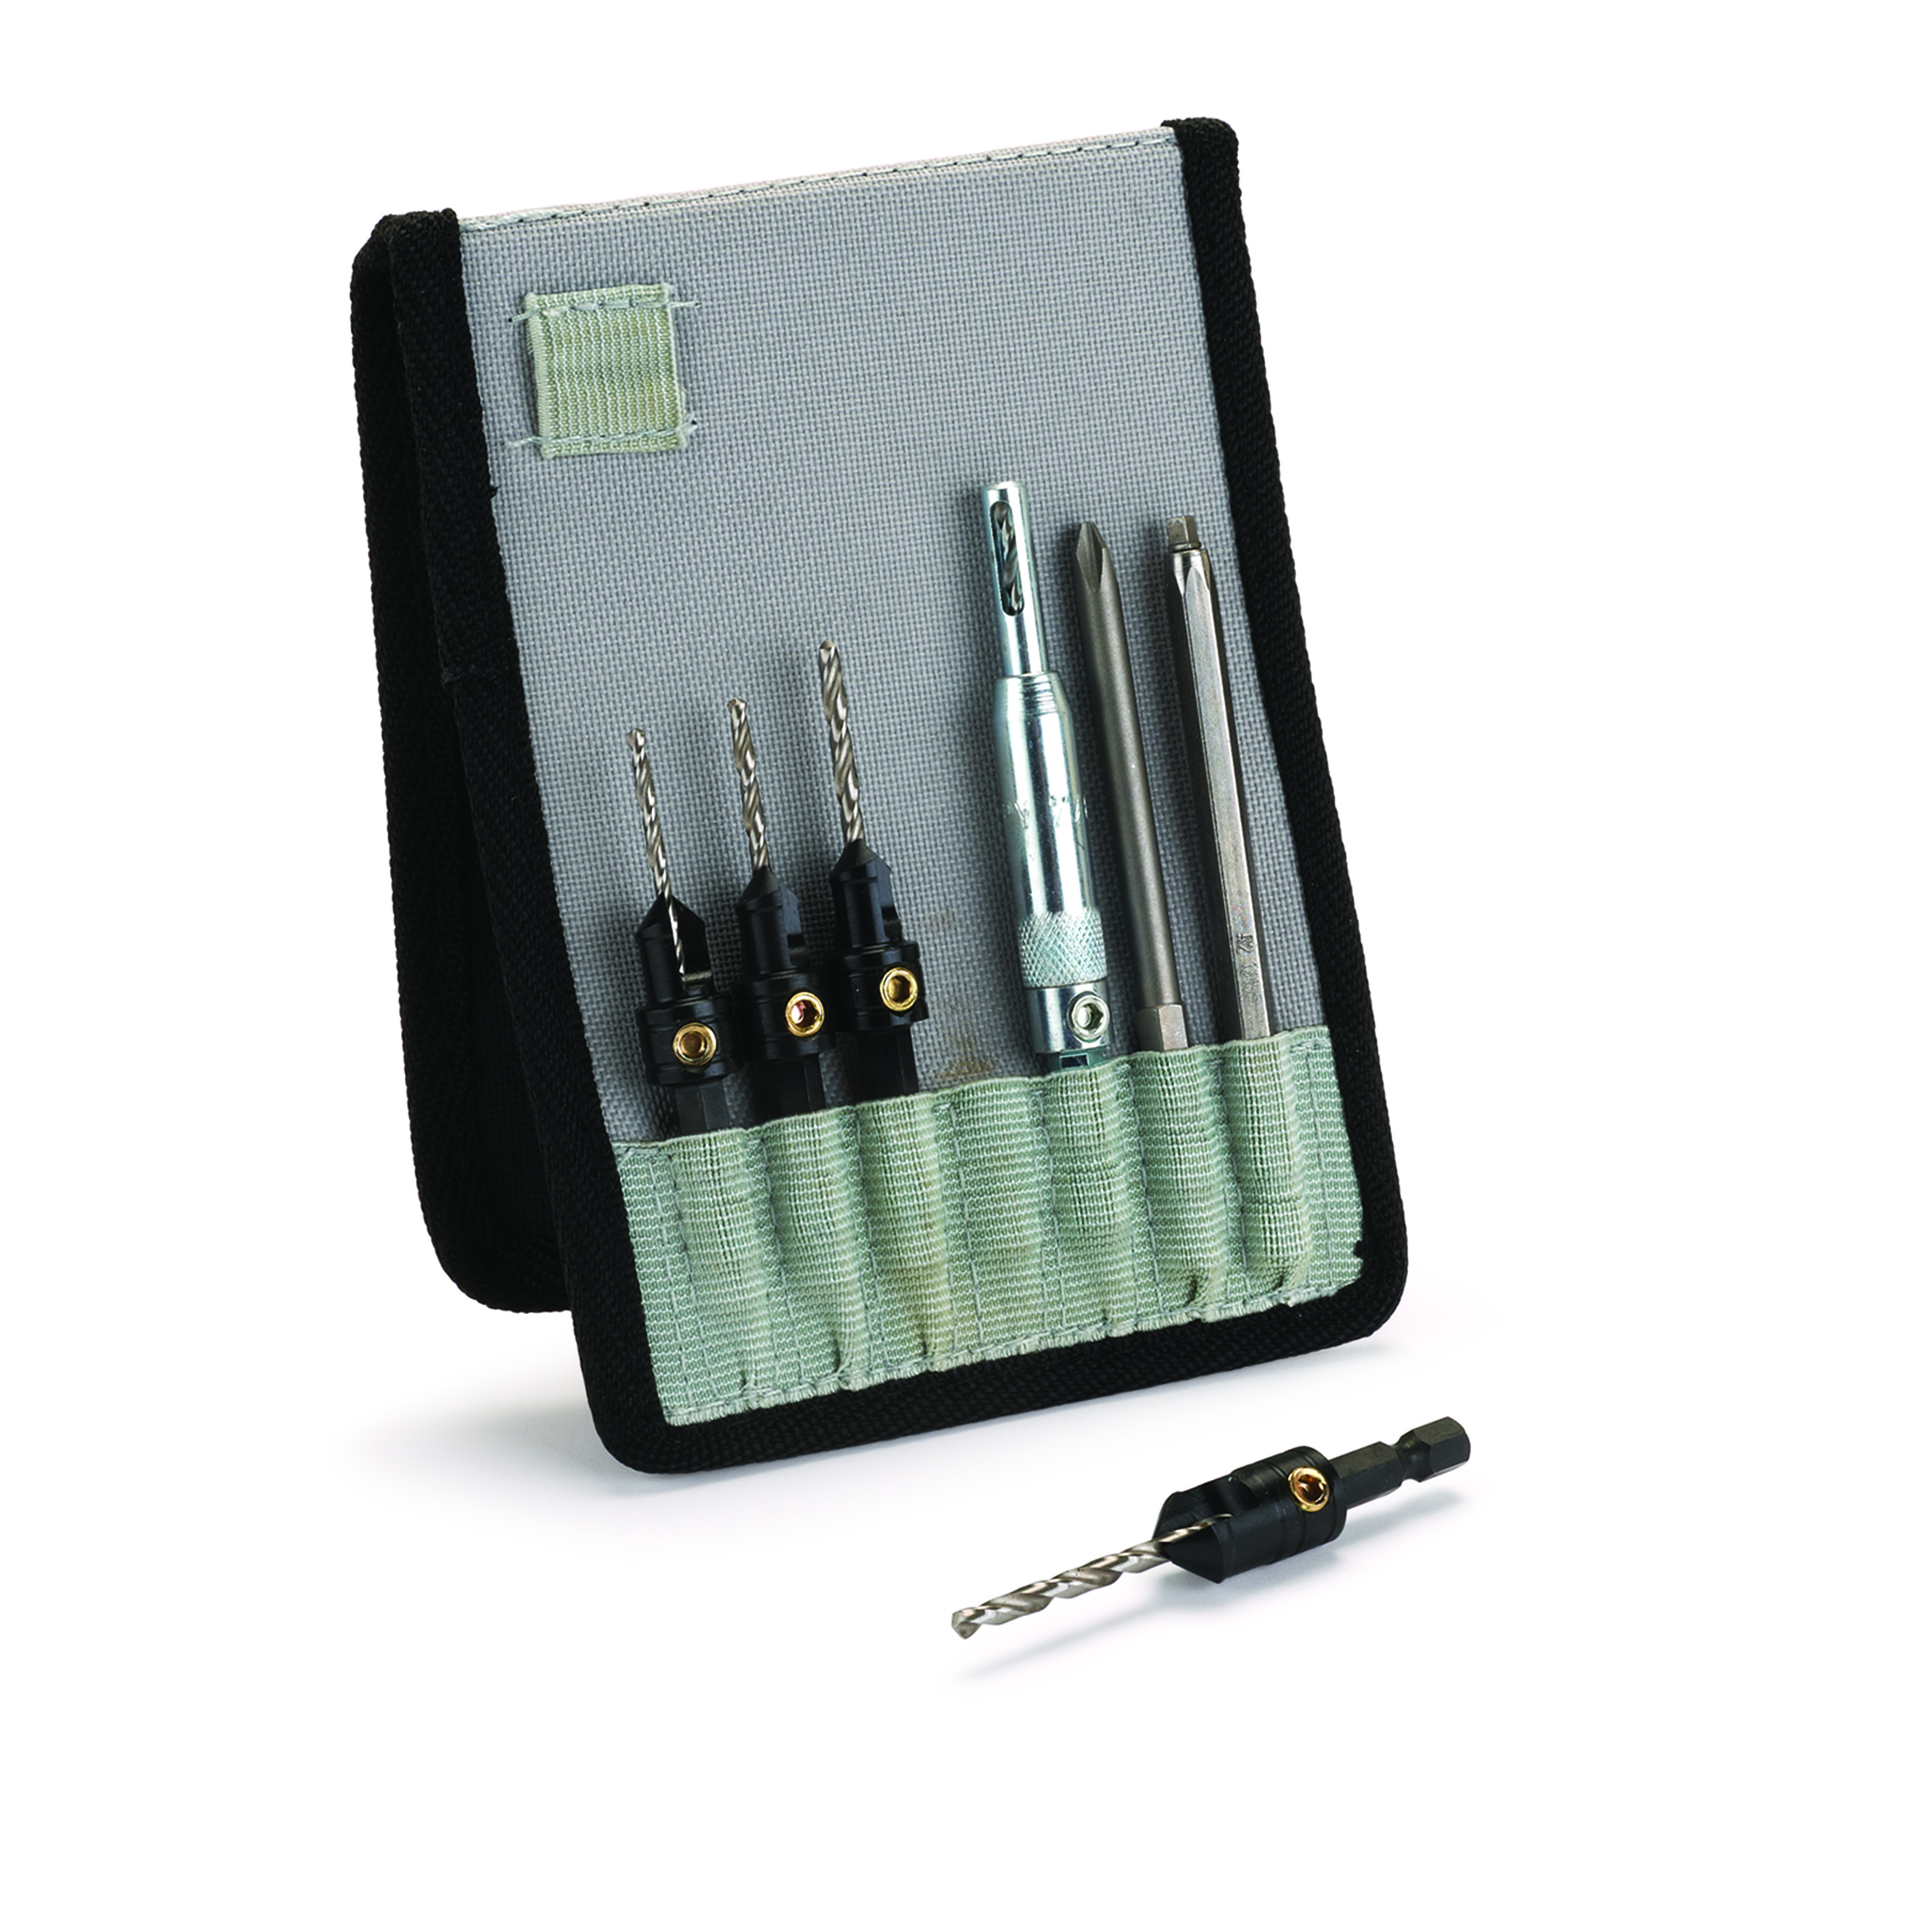 7-piece Drill And Drive Set Fits 1/4-inch Hex Chucks